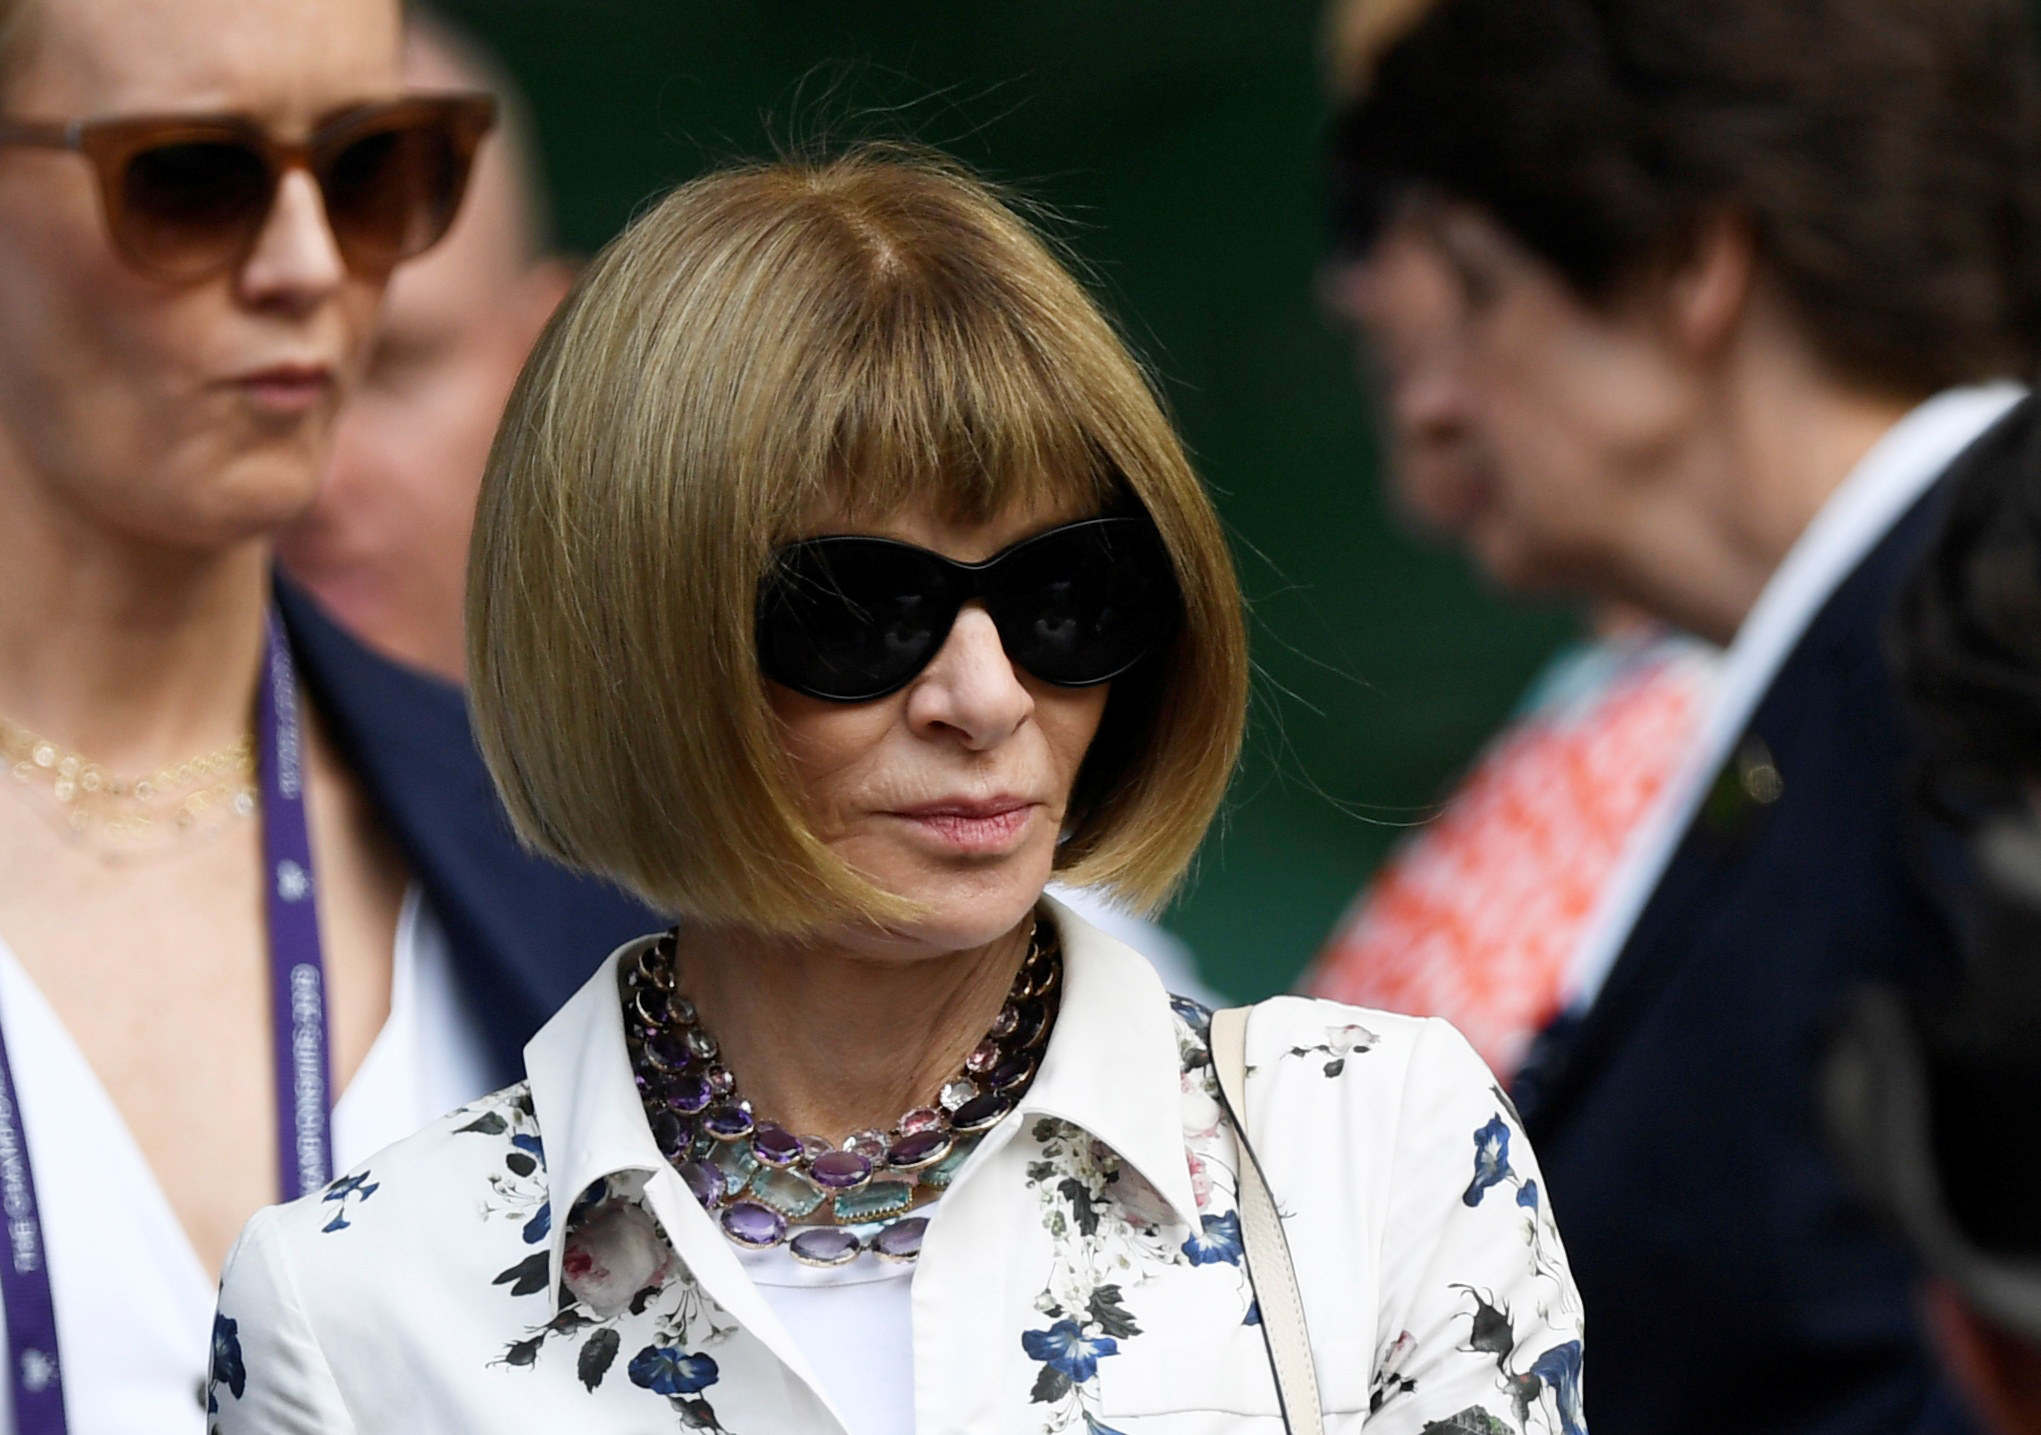 Vogue Editor Anna Wintour Isn't Going To Cancel Herself